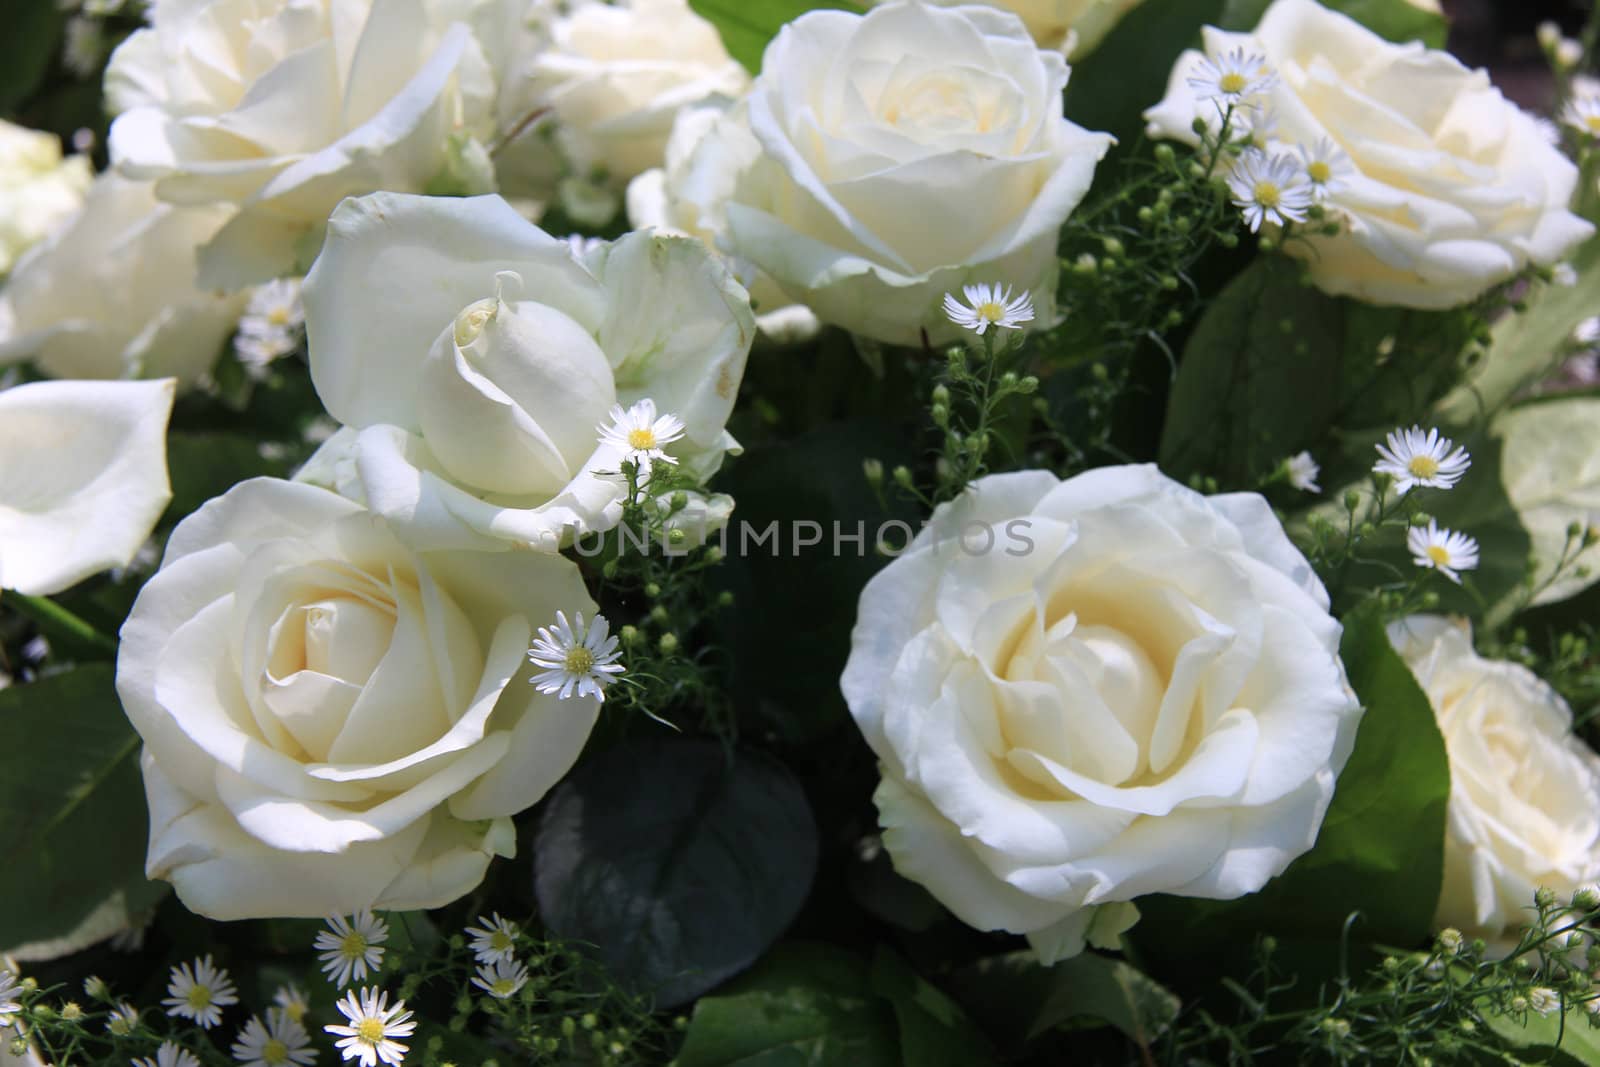 White roses and matricaria in a wedding centerpiece